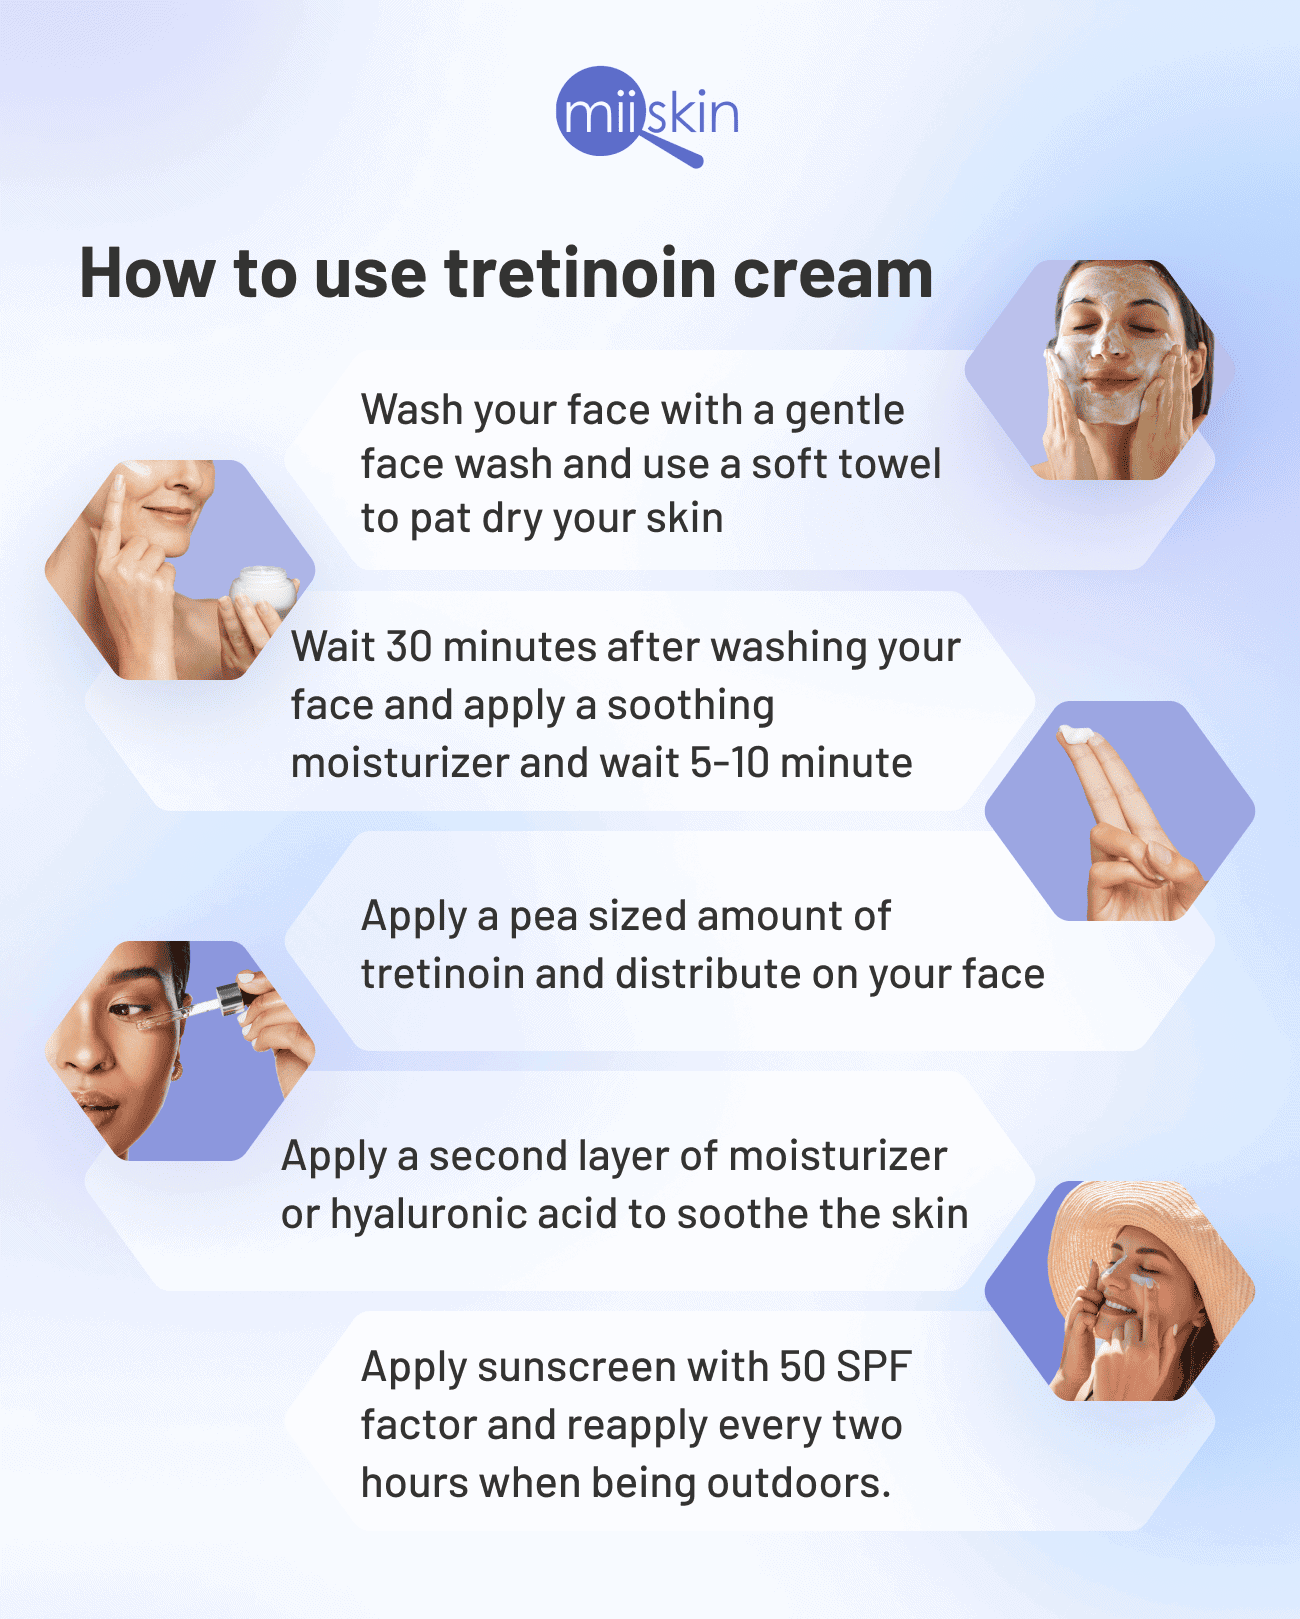 how to use tretinoin